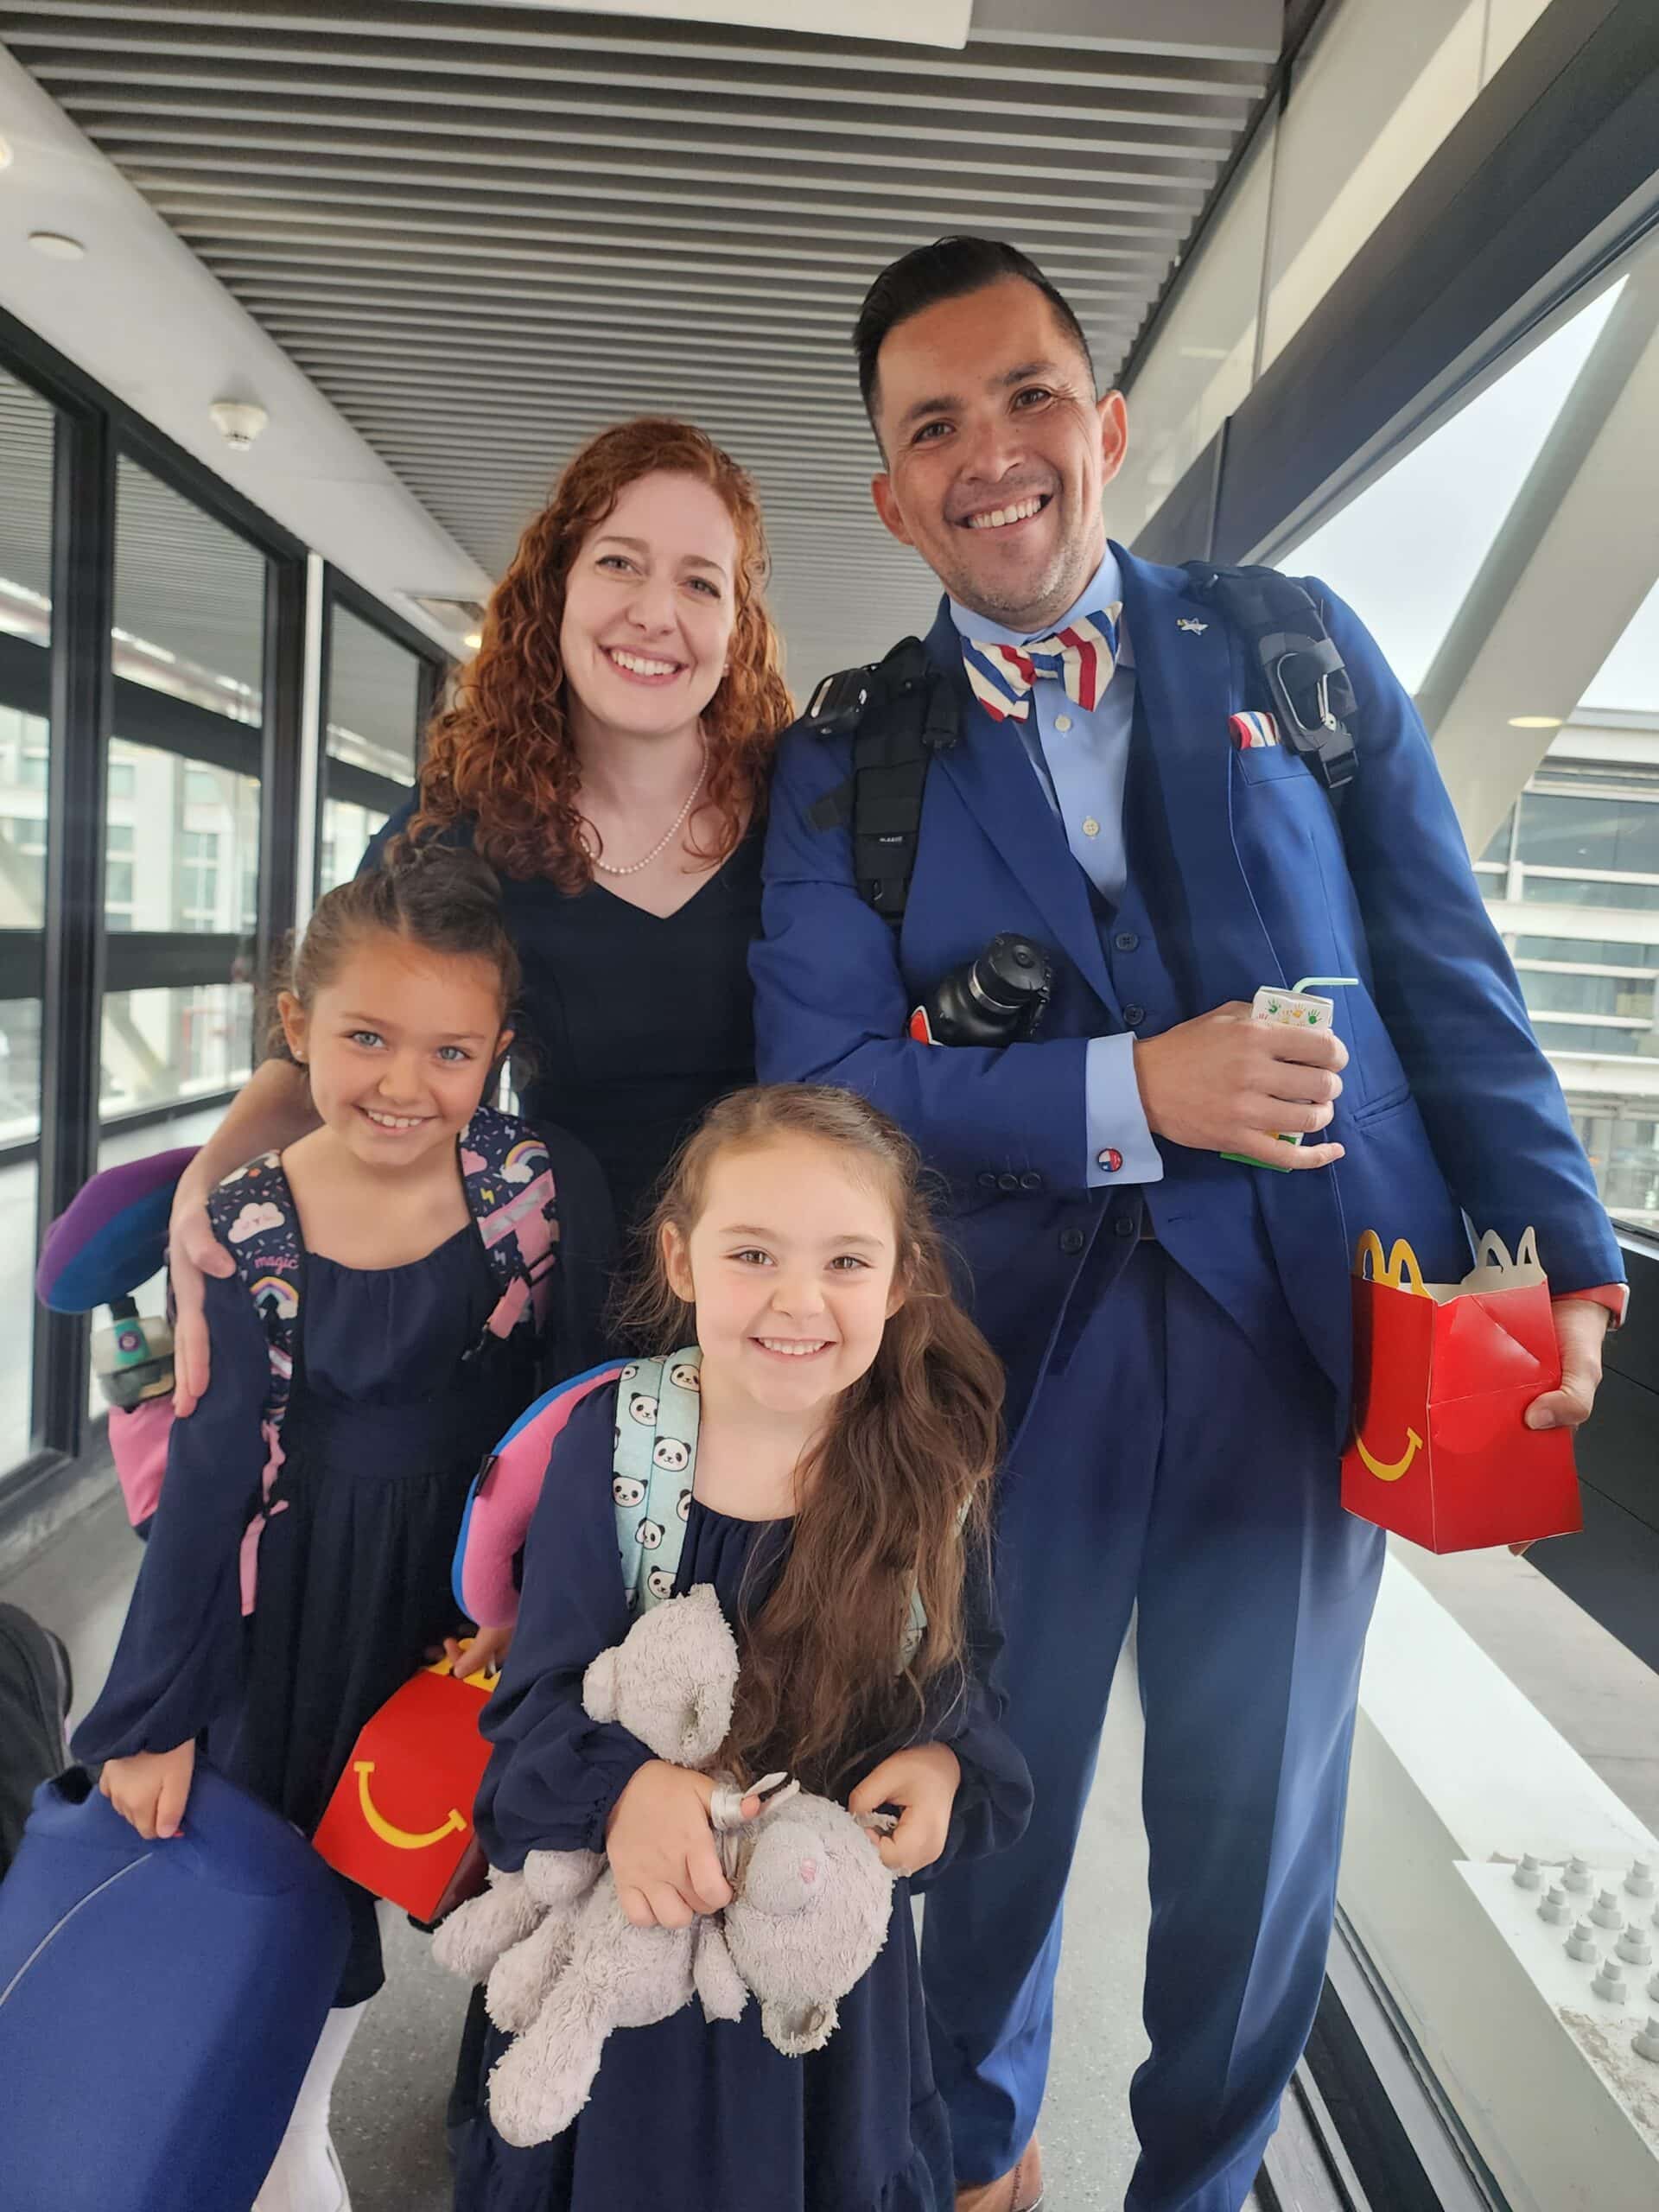 Jimmy at the airport with his wife and daughters, on their way to Chile